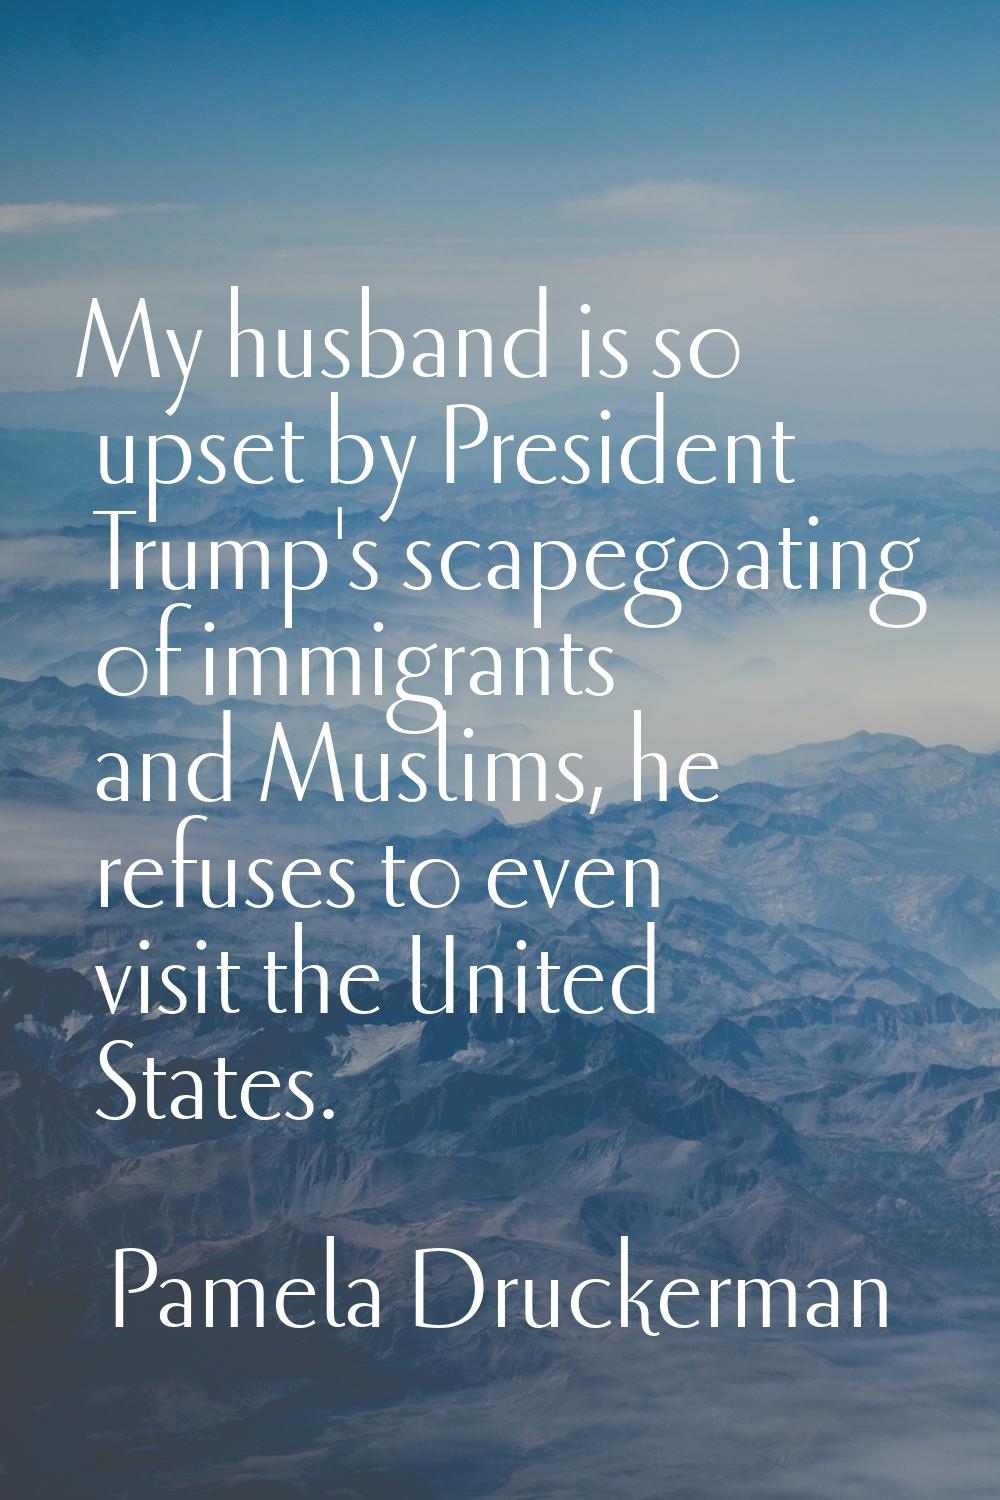 My husband is so upset by President Trump's scapegoating of immigrants and Muslims, he refuses to e